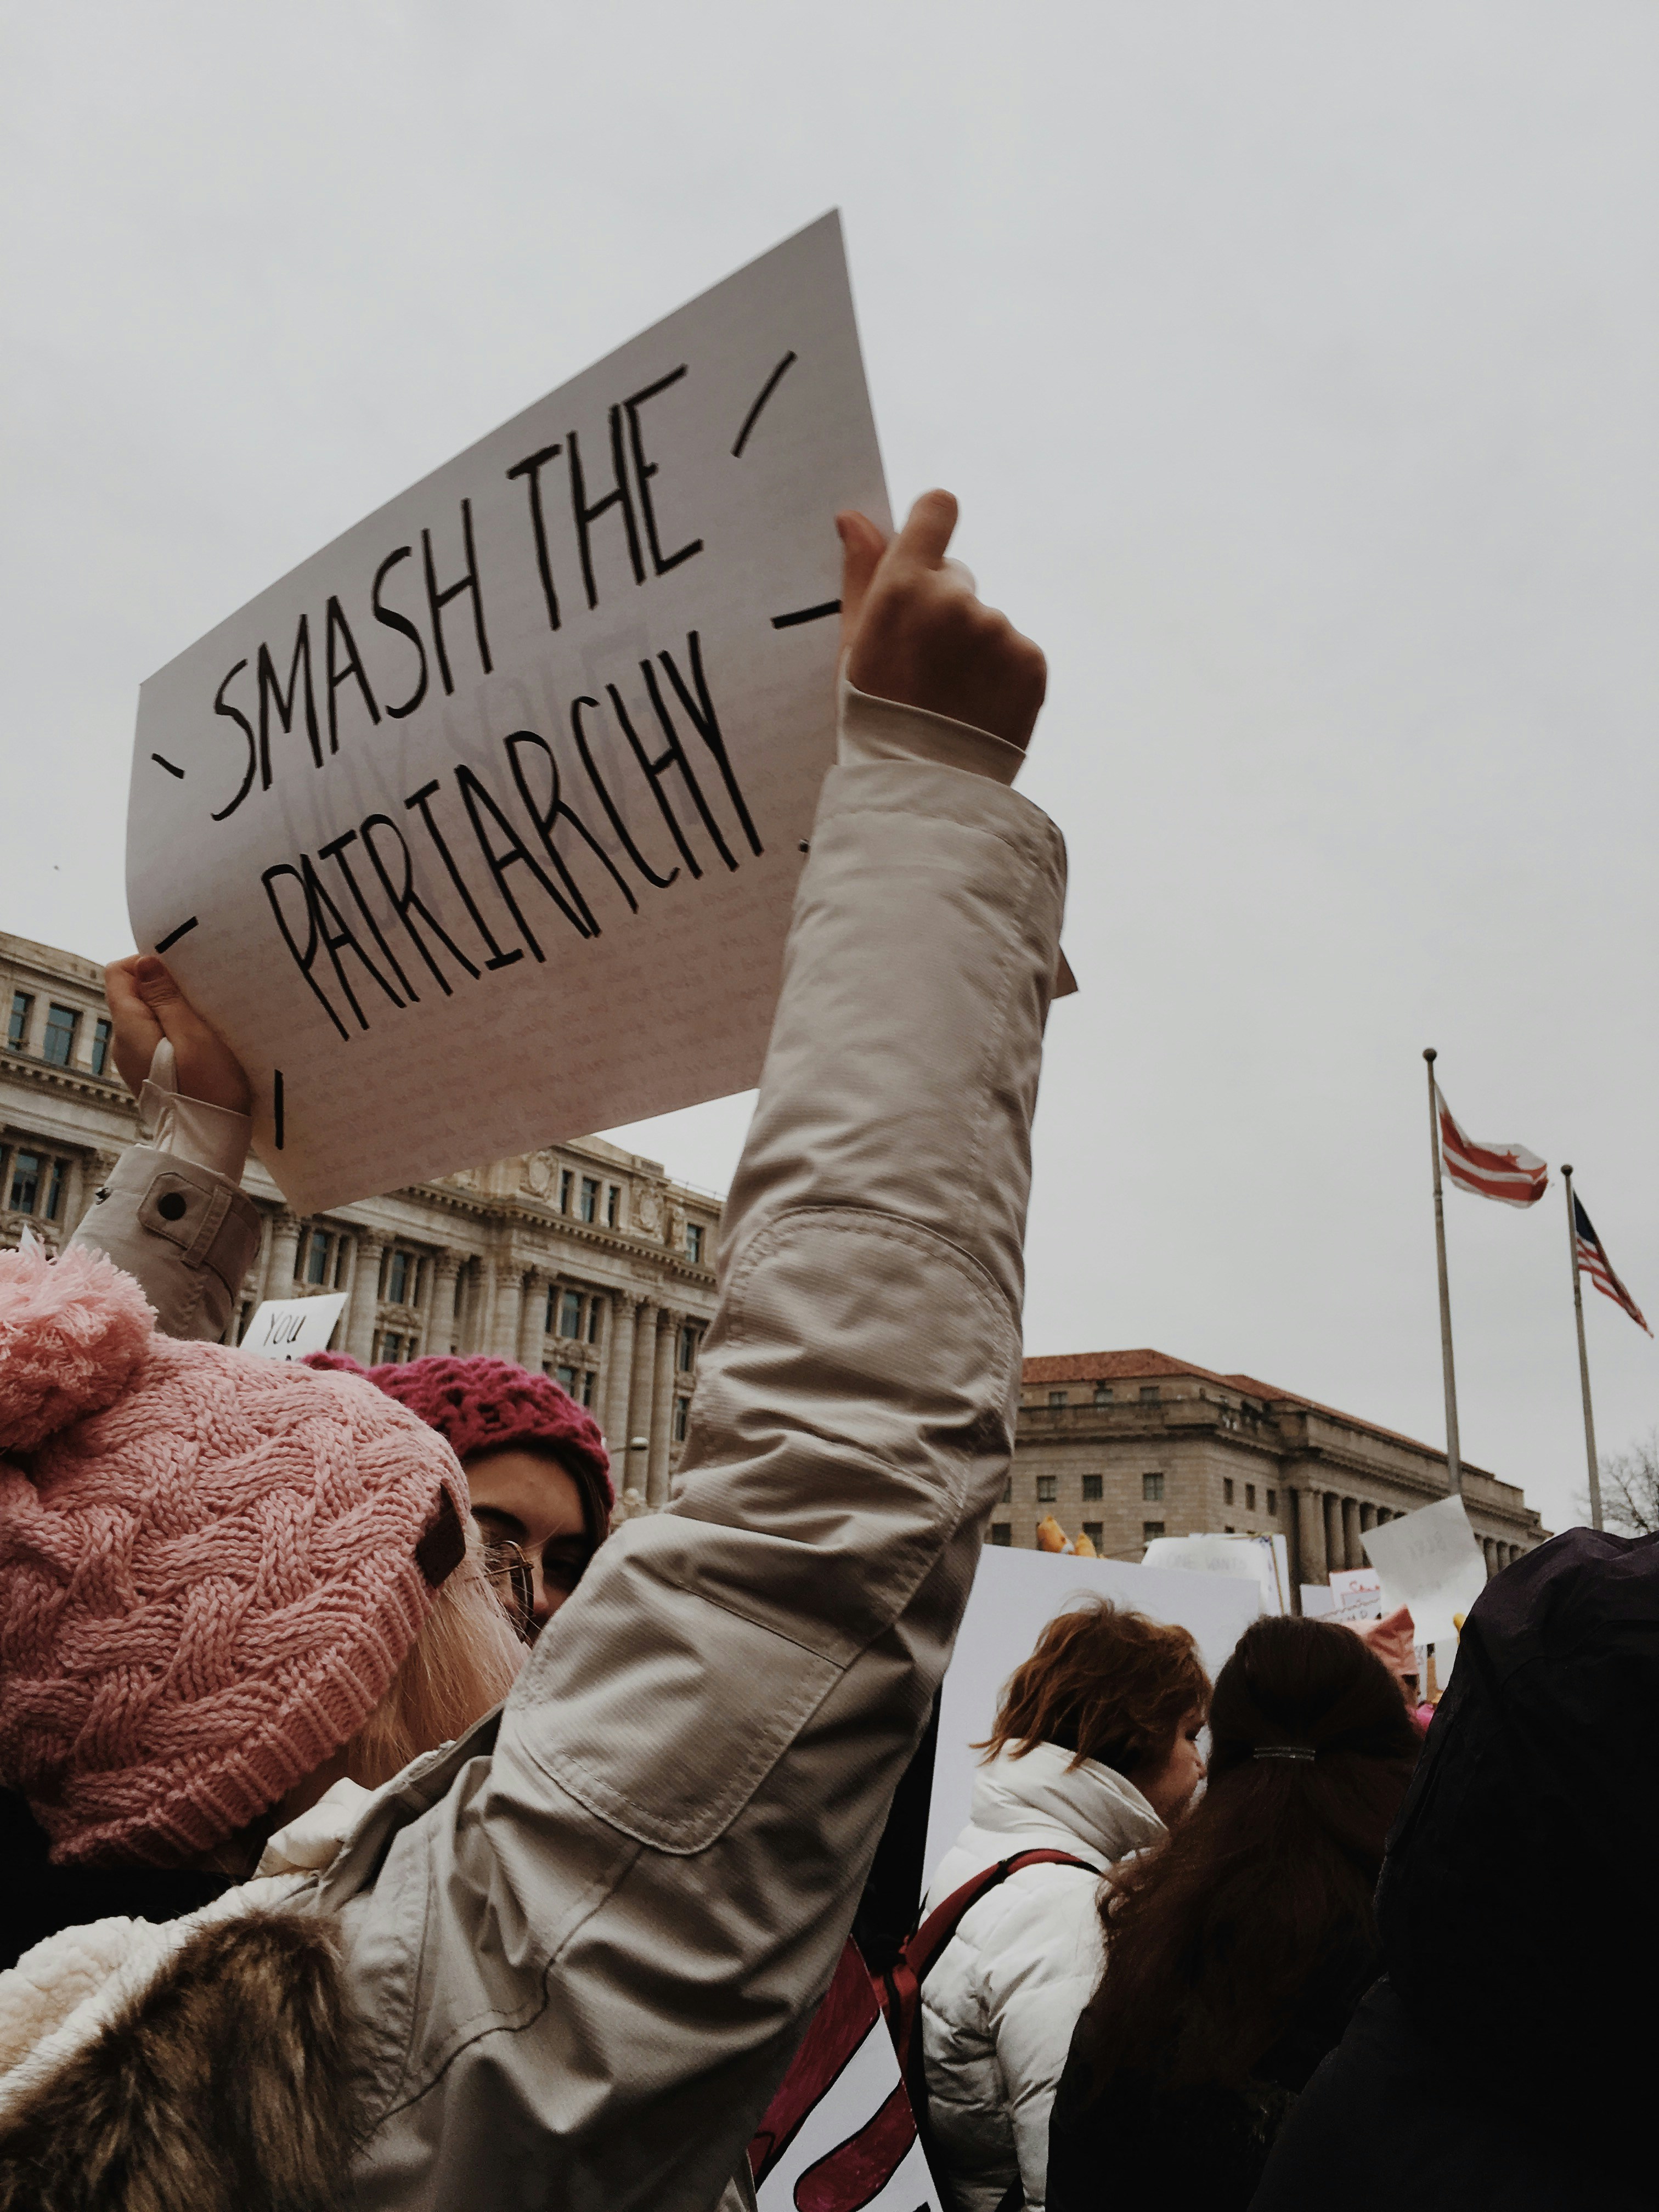 Taken at the DC Women’s March, of a sign being held by a women next to me.